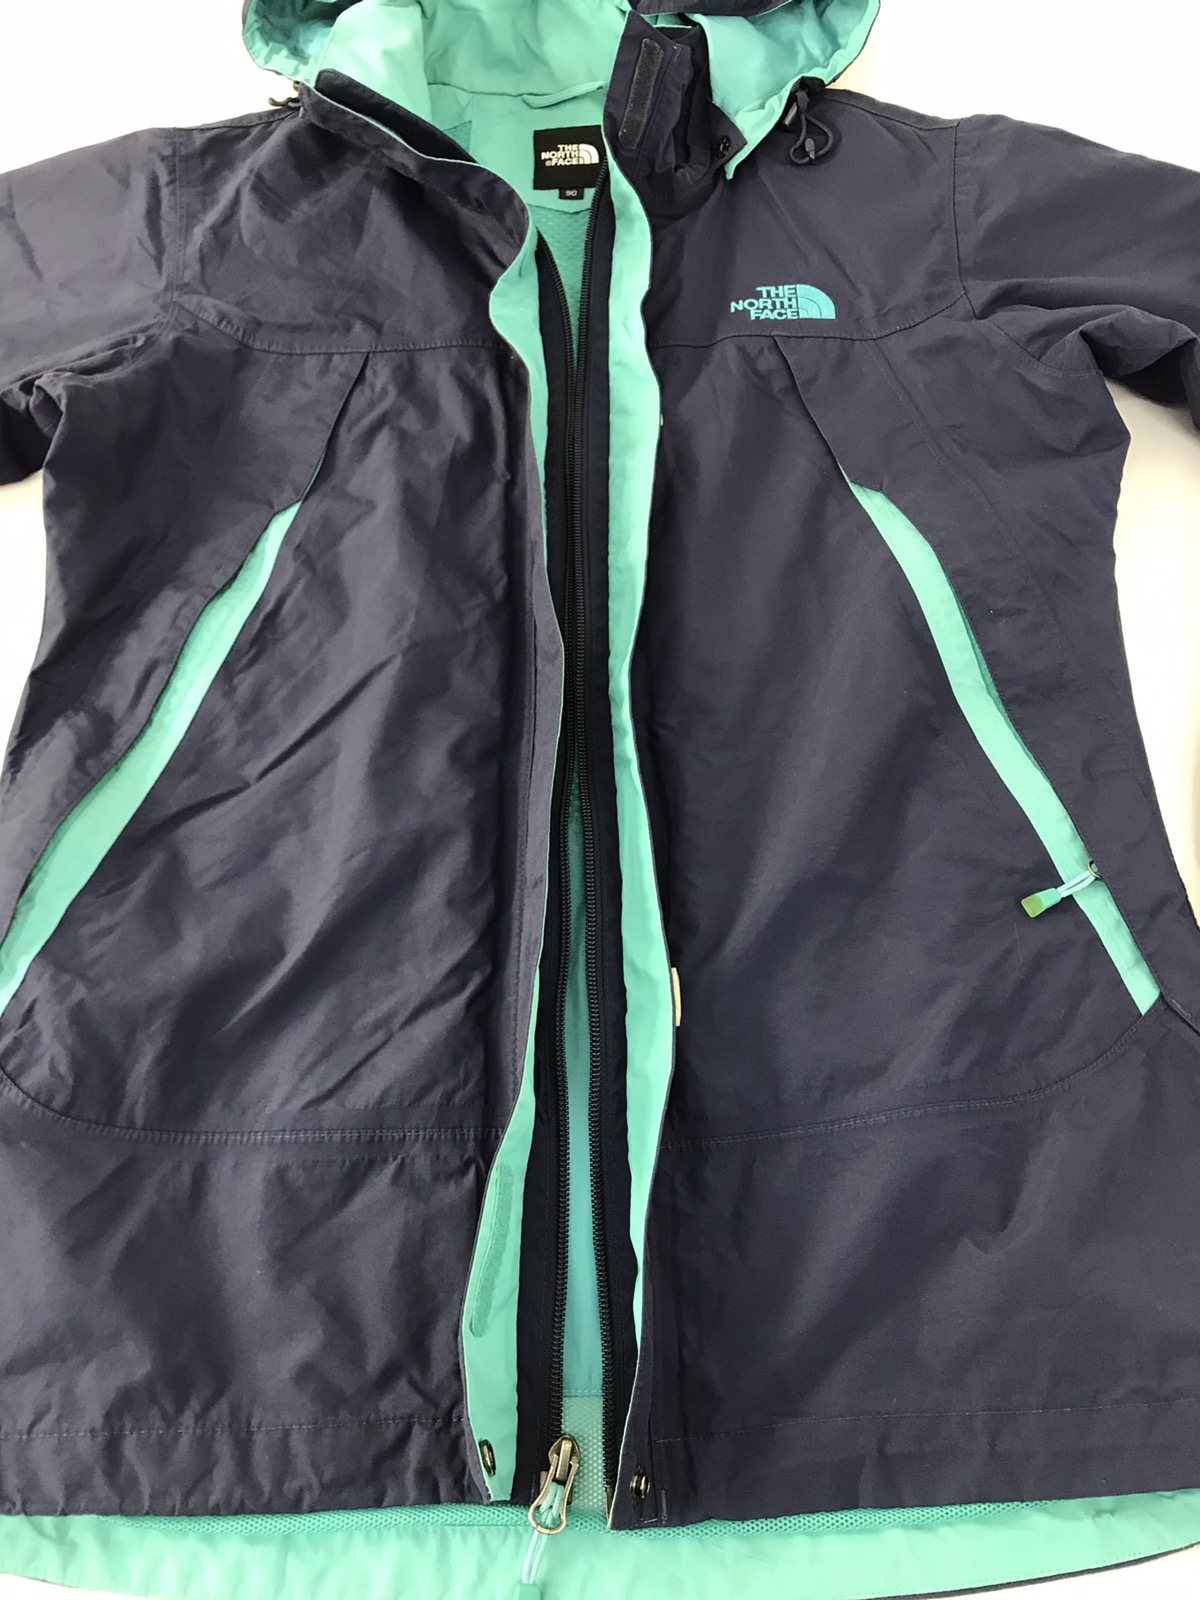 The North Face Quilted Jacket Zipper Style Outdoor Hiking - 6